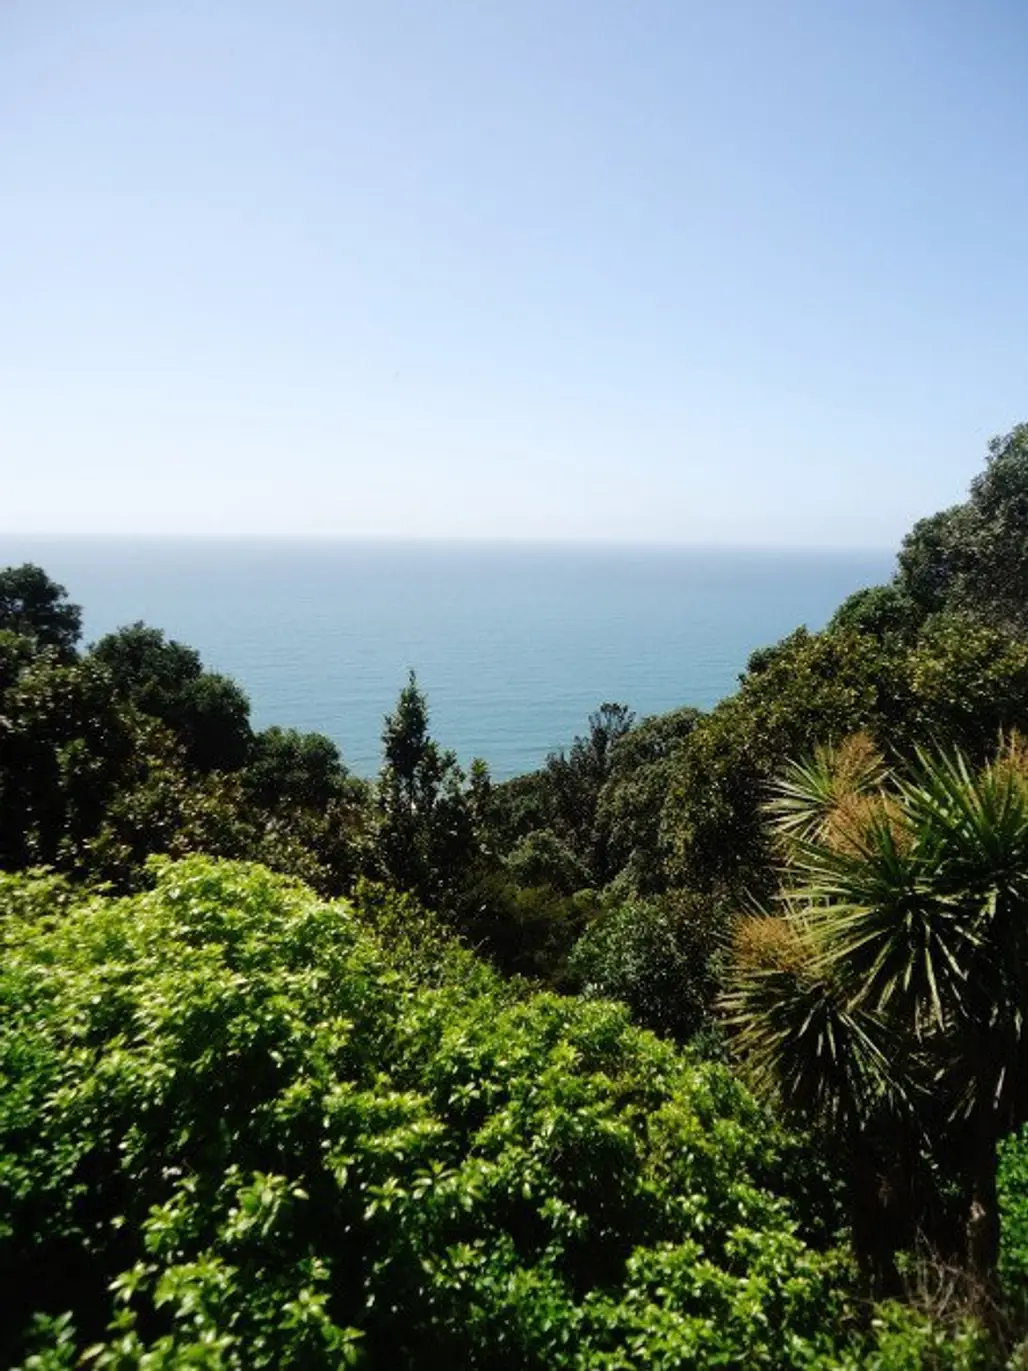 The Bay of Plenty is the Best Part of New Zealand